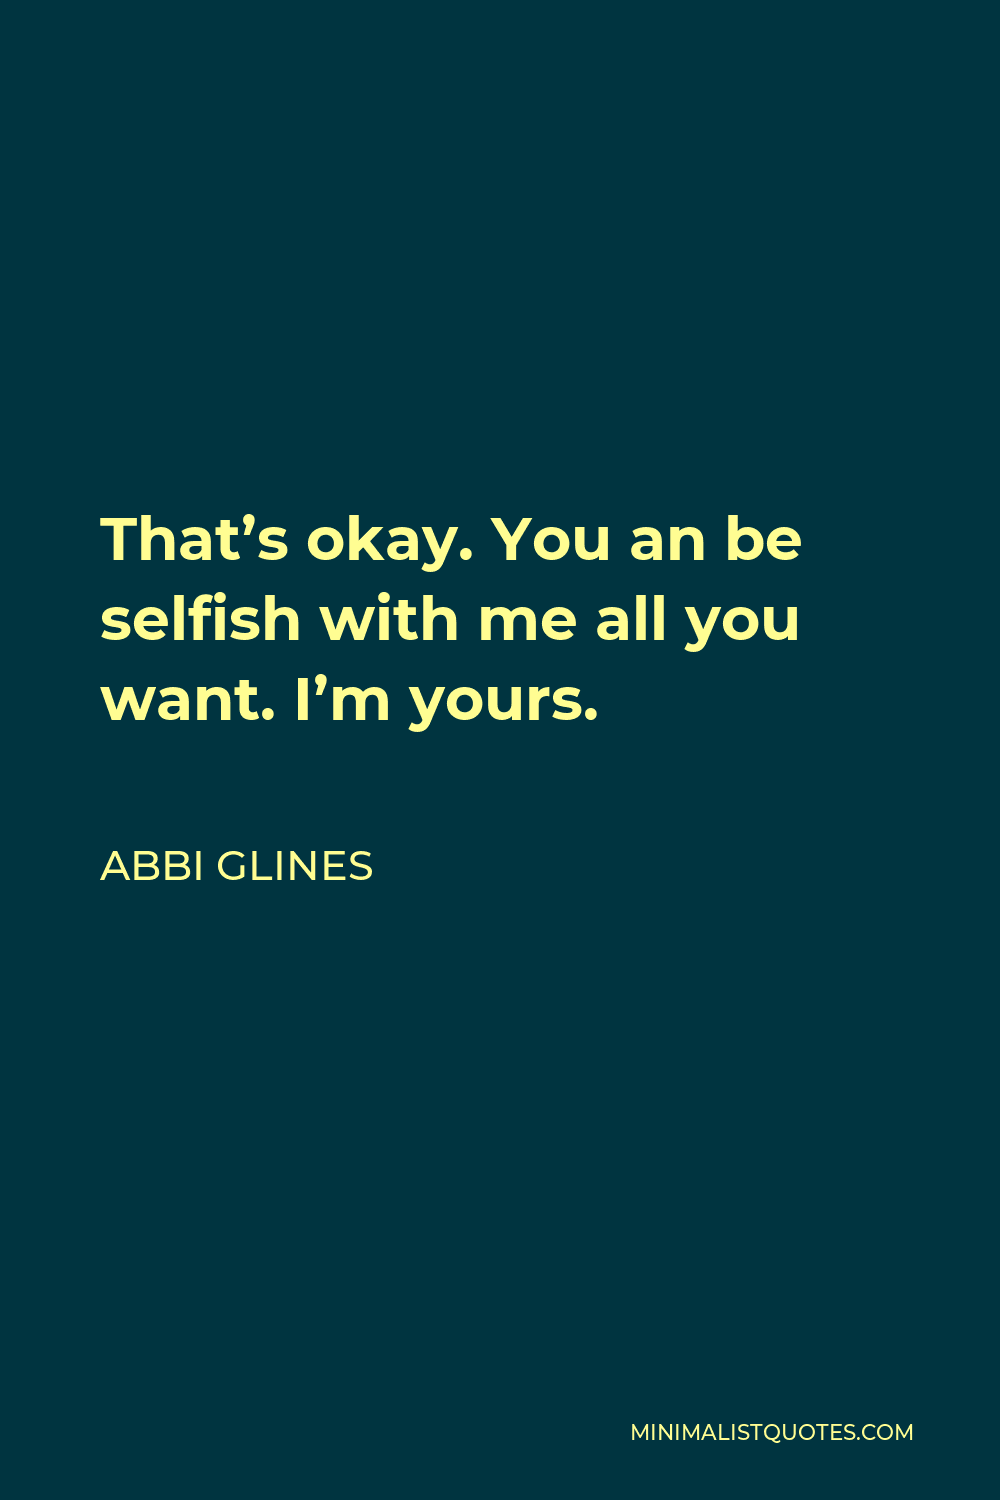 Abbi Glines Quote - That’s okay. You an be selfish with me all you want. I’m yours.